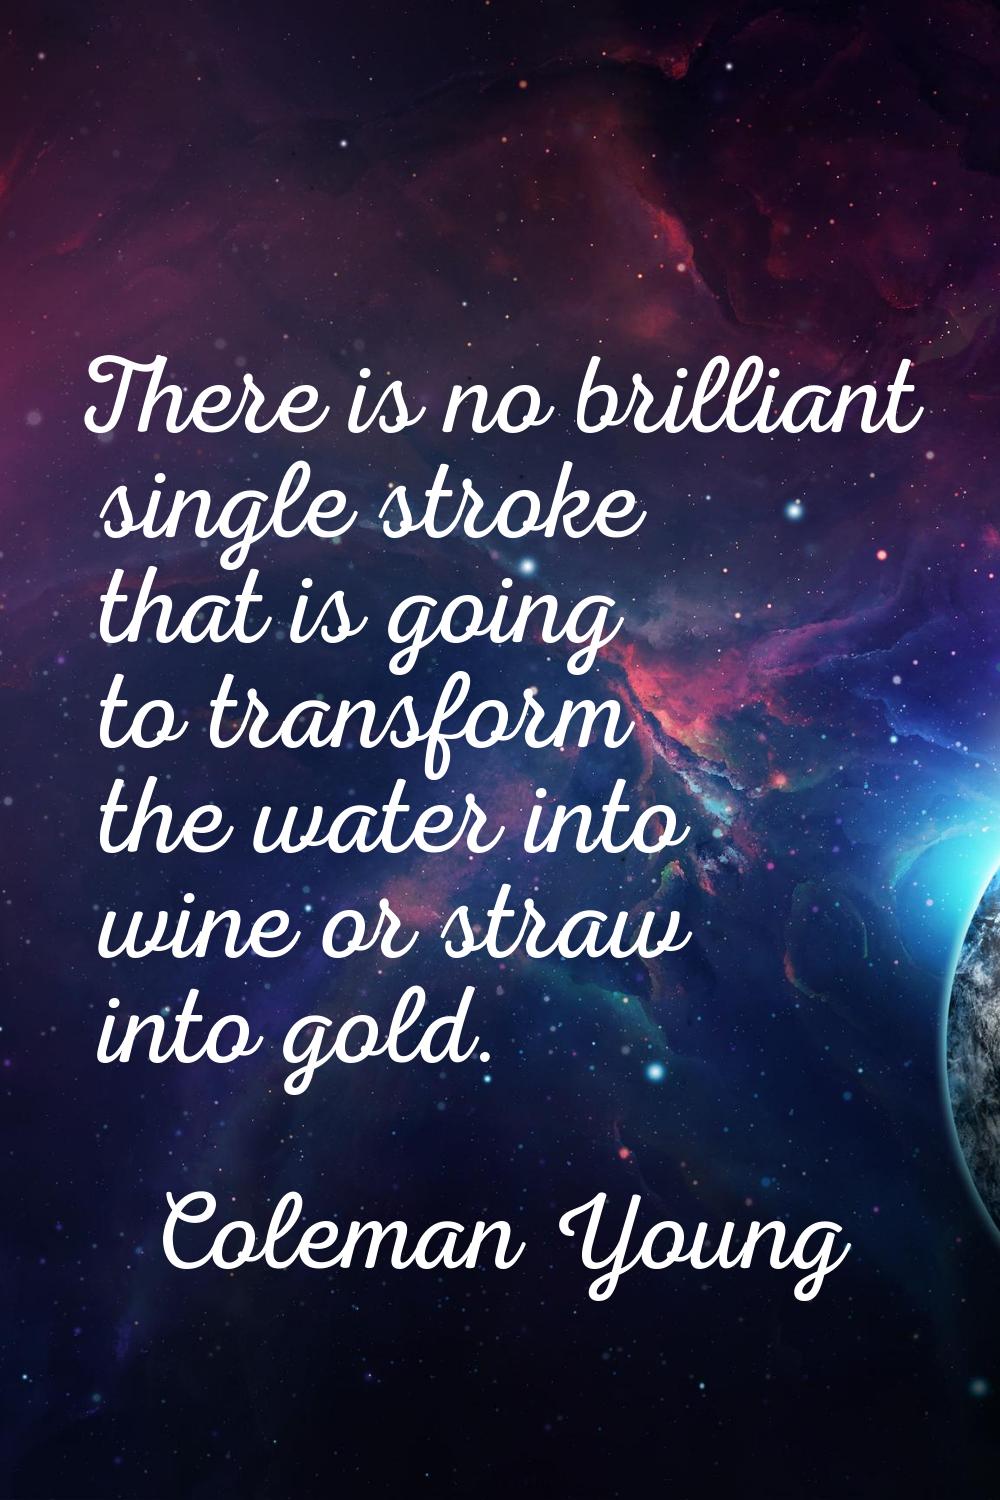 There is no brilliant single stroke that is going to transform the water into wine or straw into go